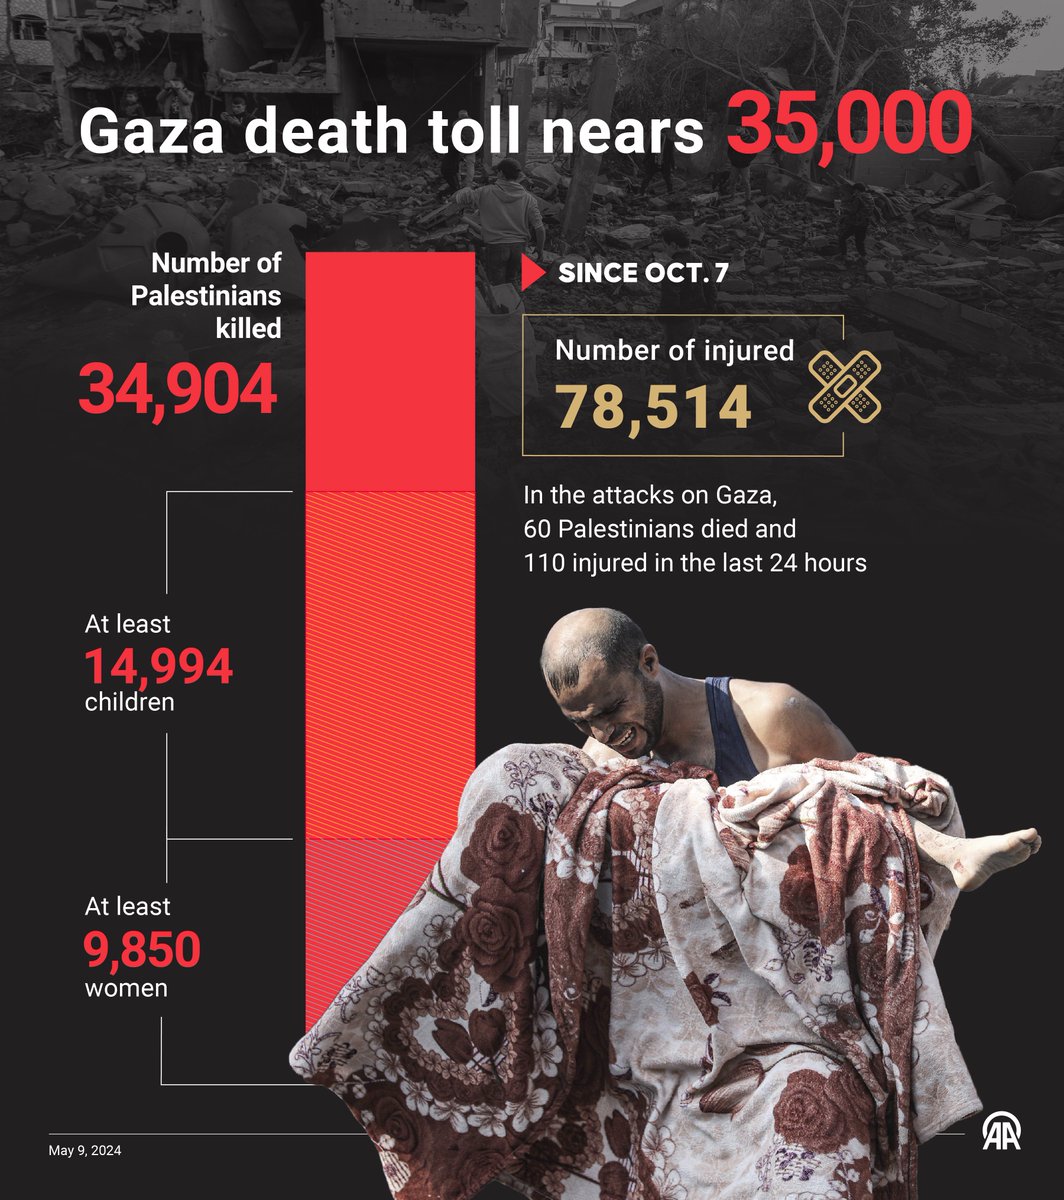 UPDATE: Attacks on Gaza have seen another 60 Palestinians killed and 110 injured in the last 24 hours raising the current death count very close to 35K. The actually number of slain Palestinians is predicted to be much higher with many bodies still lost in the rubble across the…